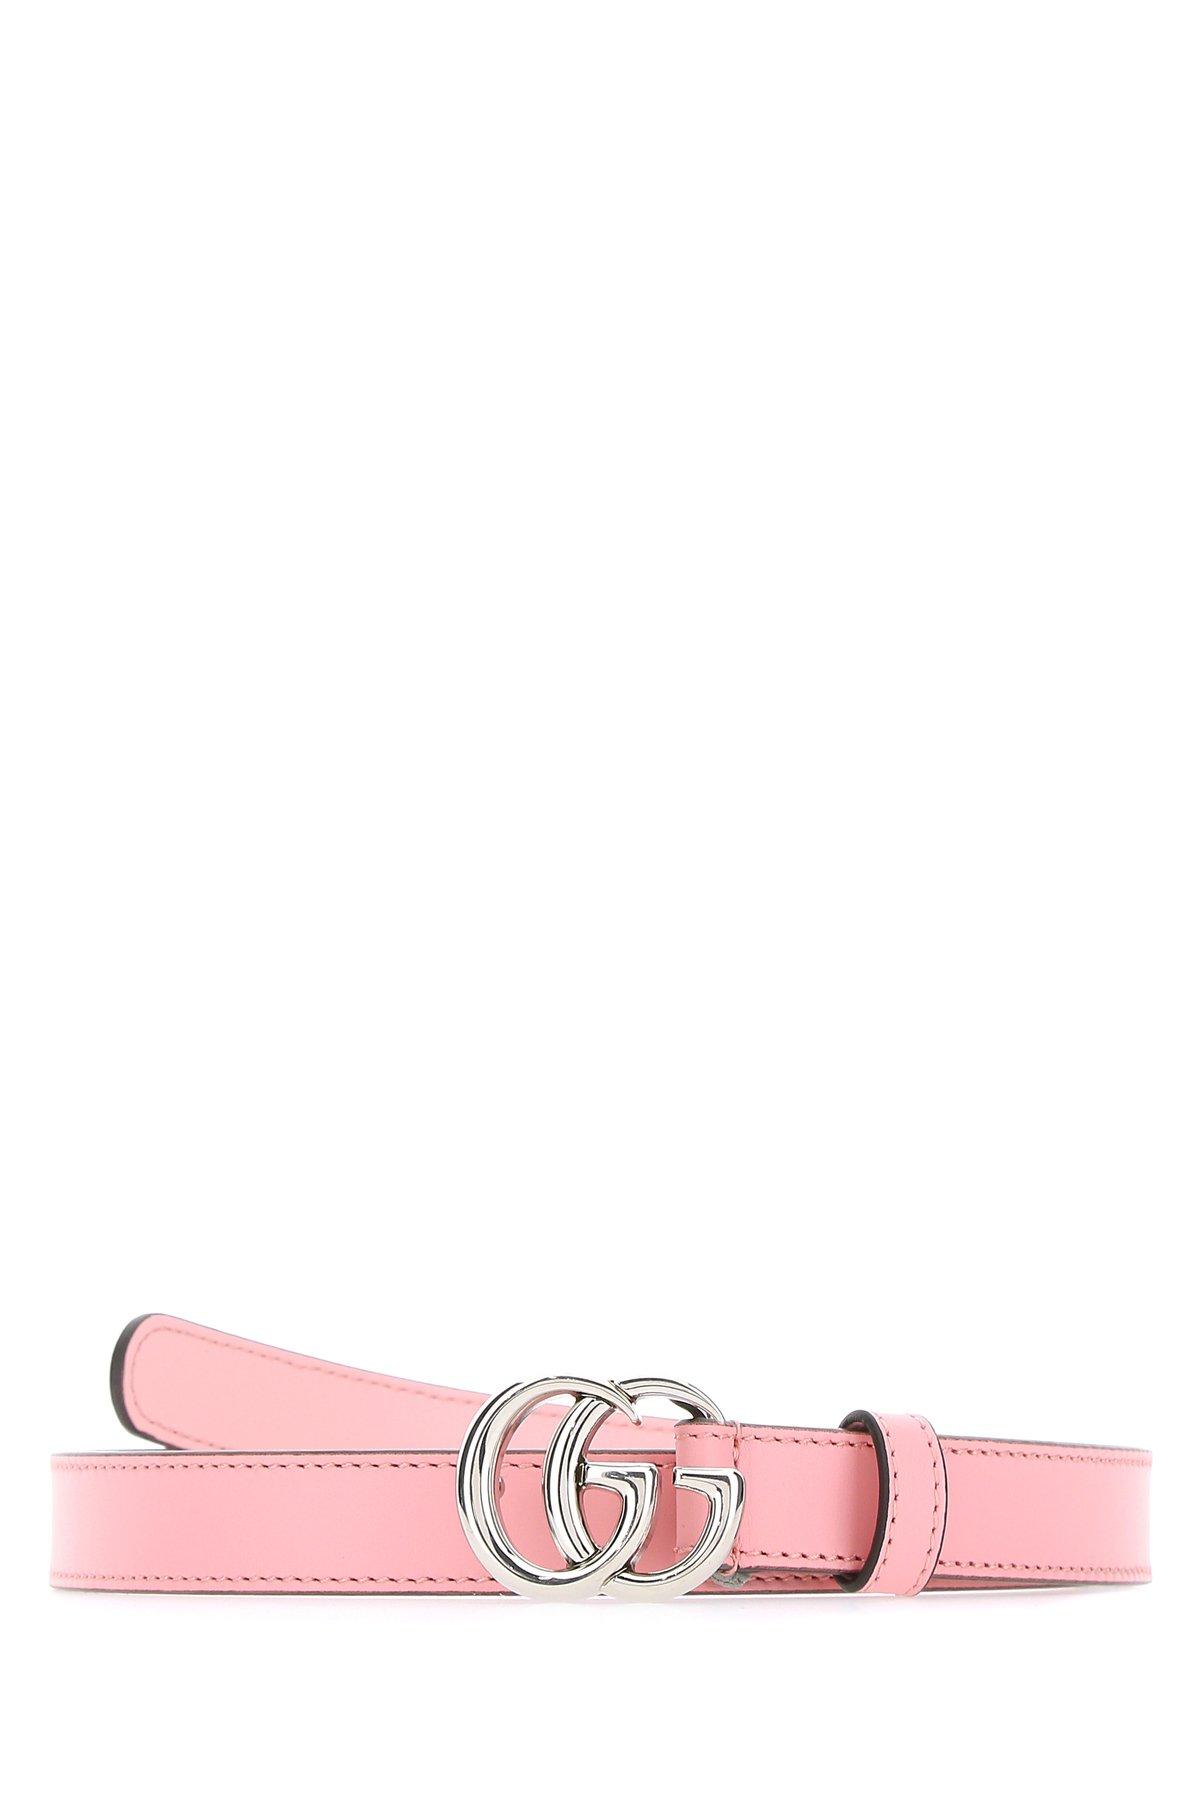 Gucci's Double Logo Pink Belt Is Already Selling Out